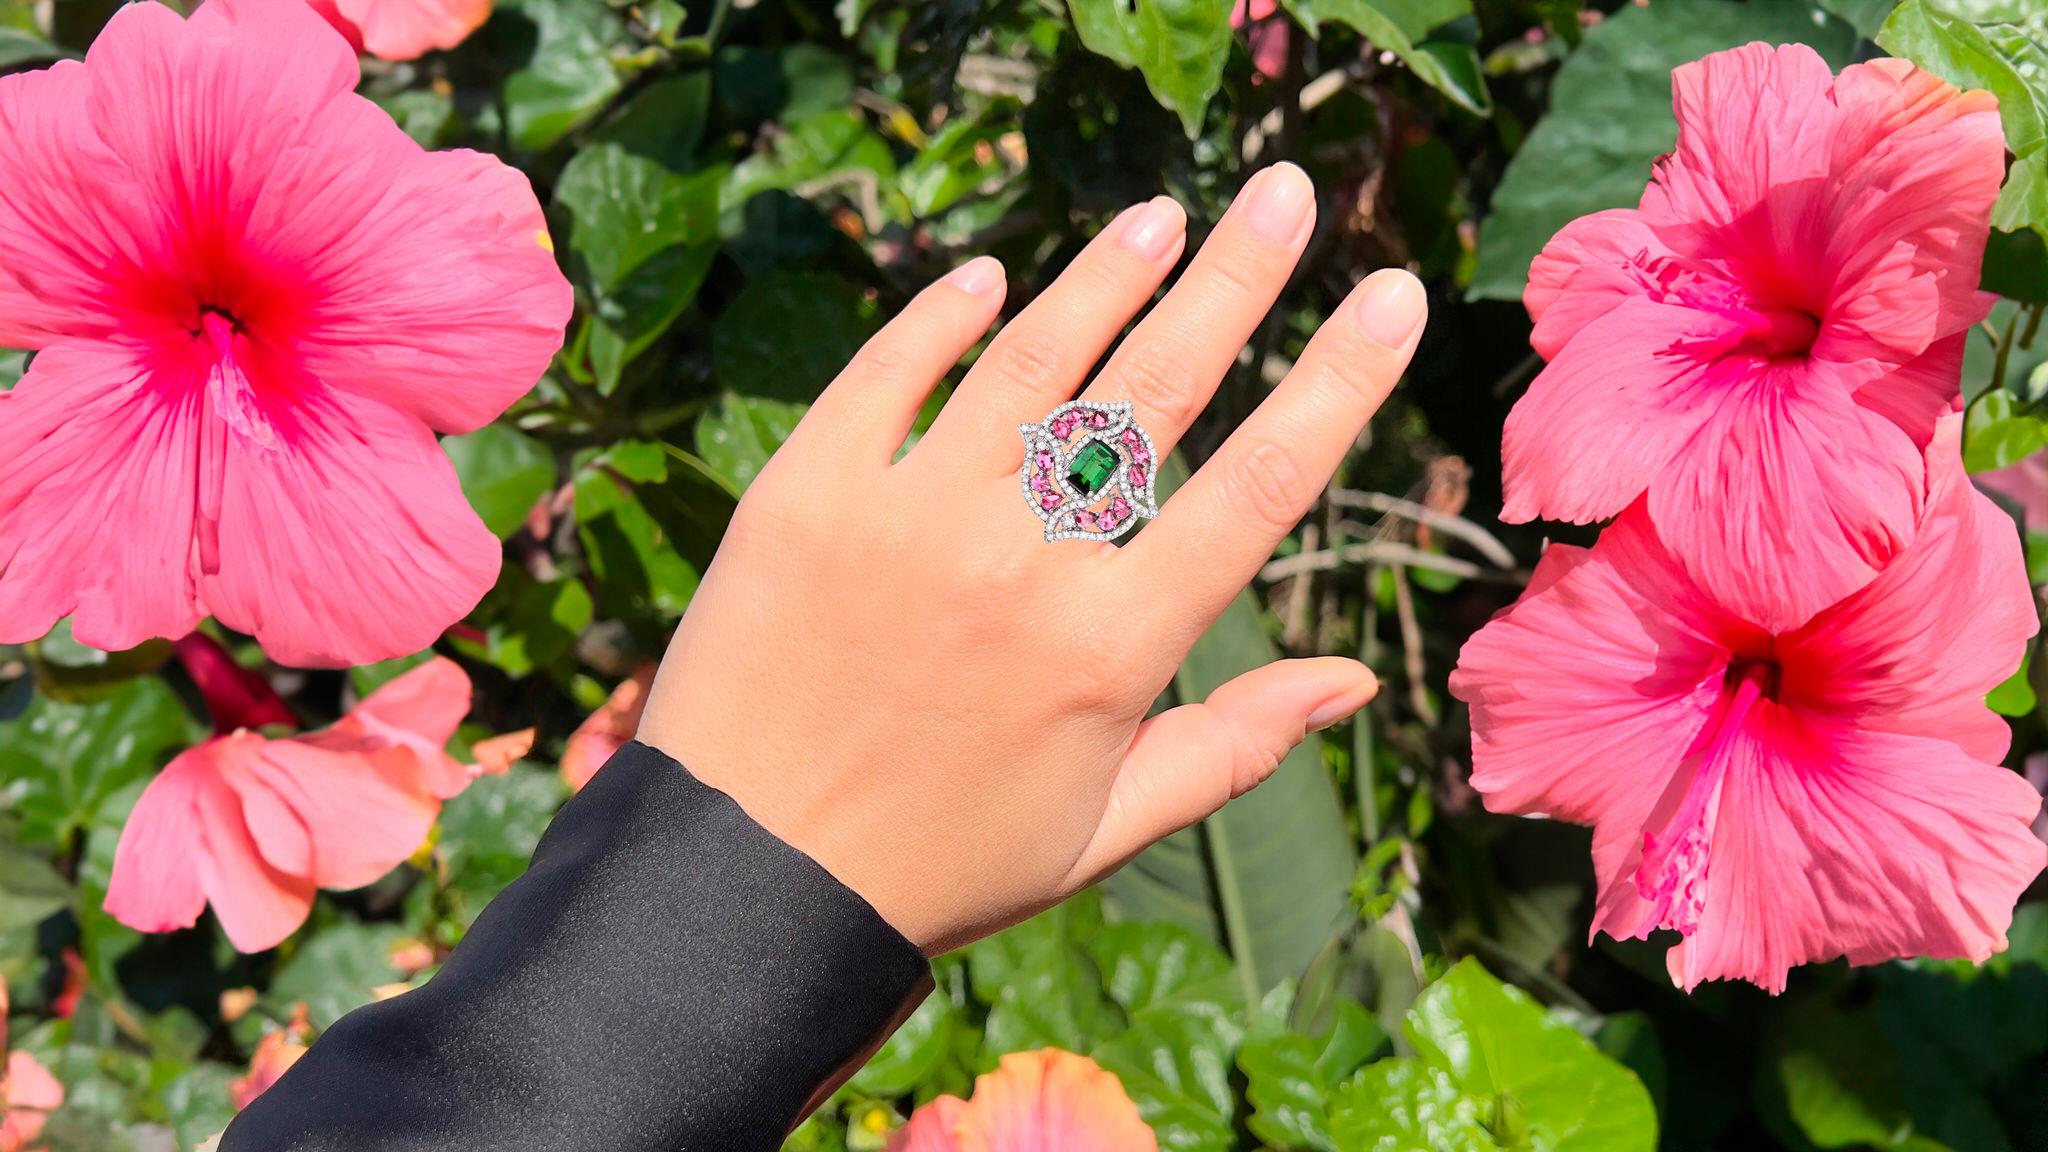 It comes with the Gemological Appraisal by GIA GG/AJP
All Gemstones are Natural
Green Tourmaline = 2.15 Carat
12 Pink Tourmalines = 1.70 Carats
40 Diamonds = 1.22 Carats
Metal: Black Rhodium Plated Sterling Silver
Ring Size: 7.5* US
*It can be